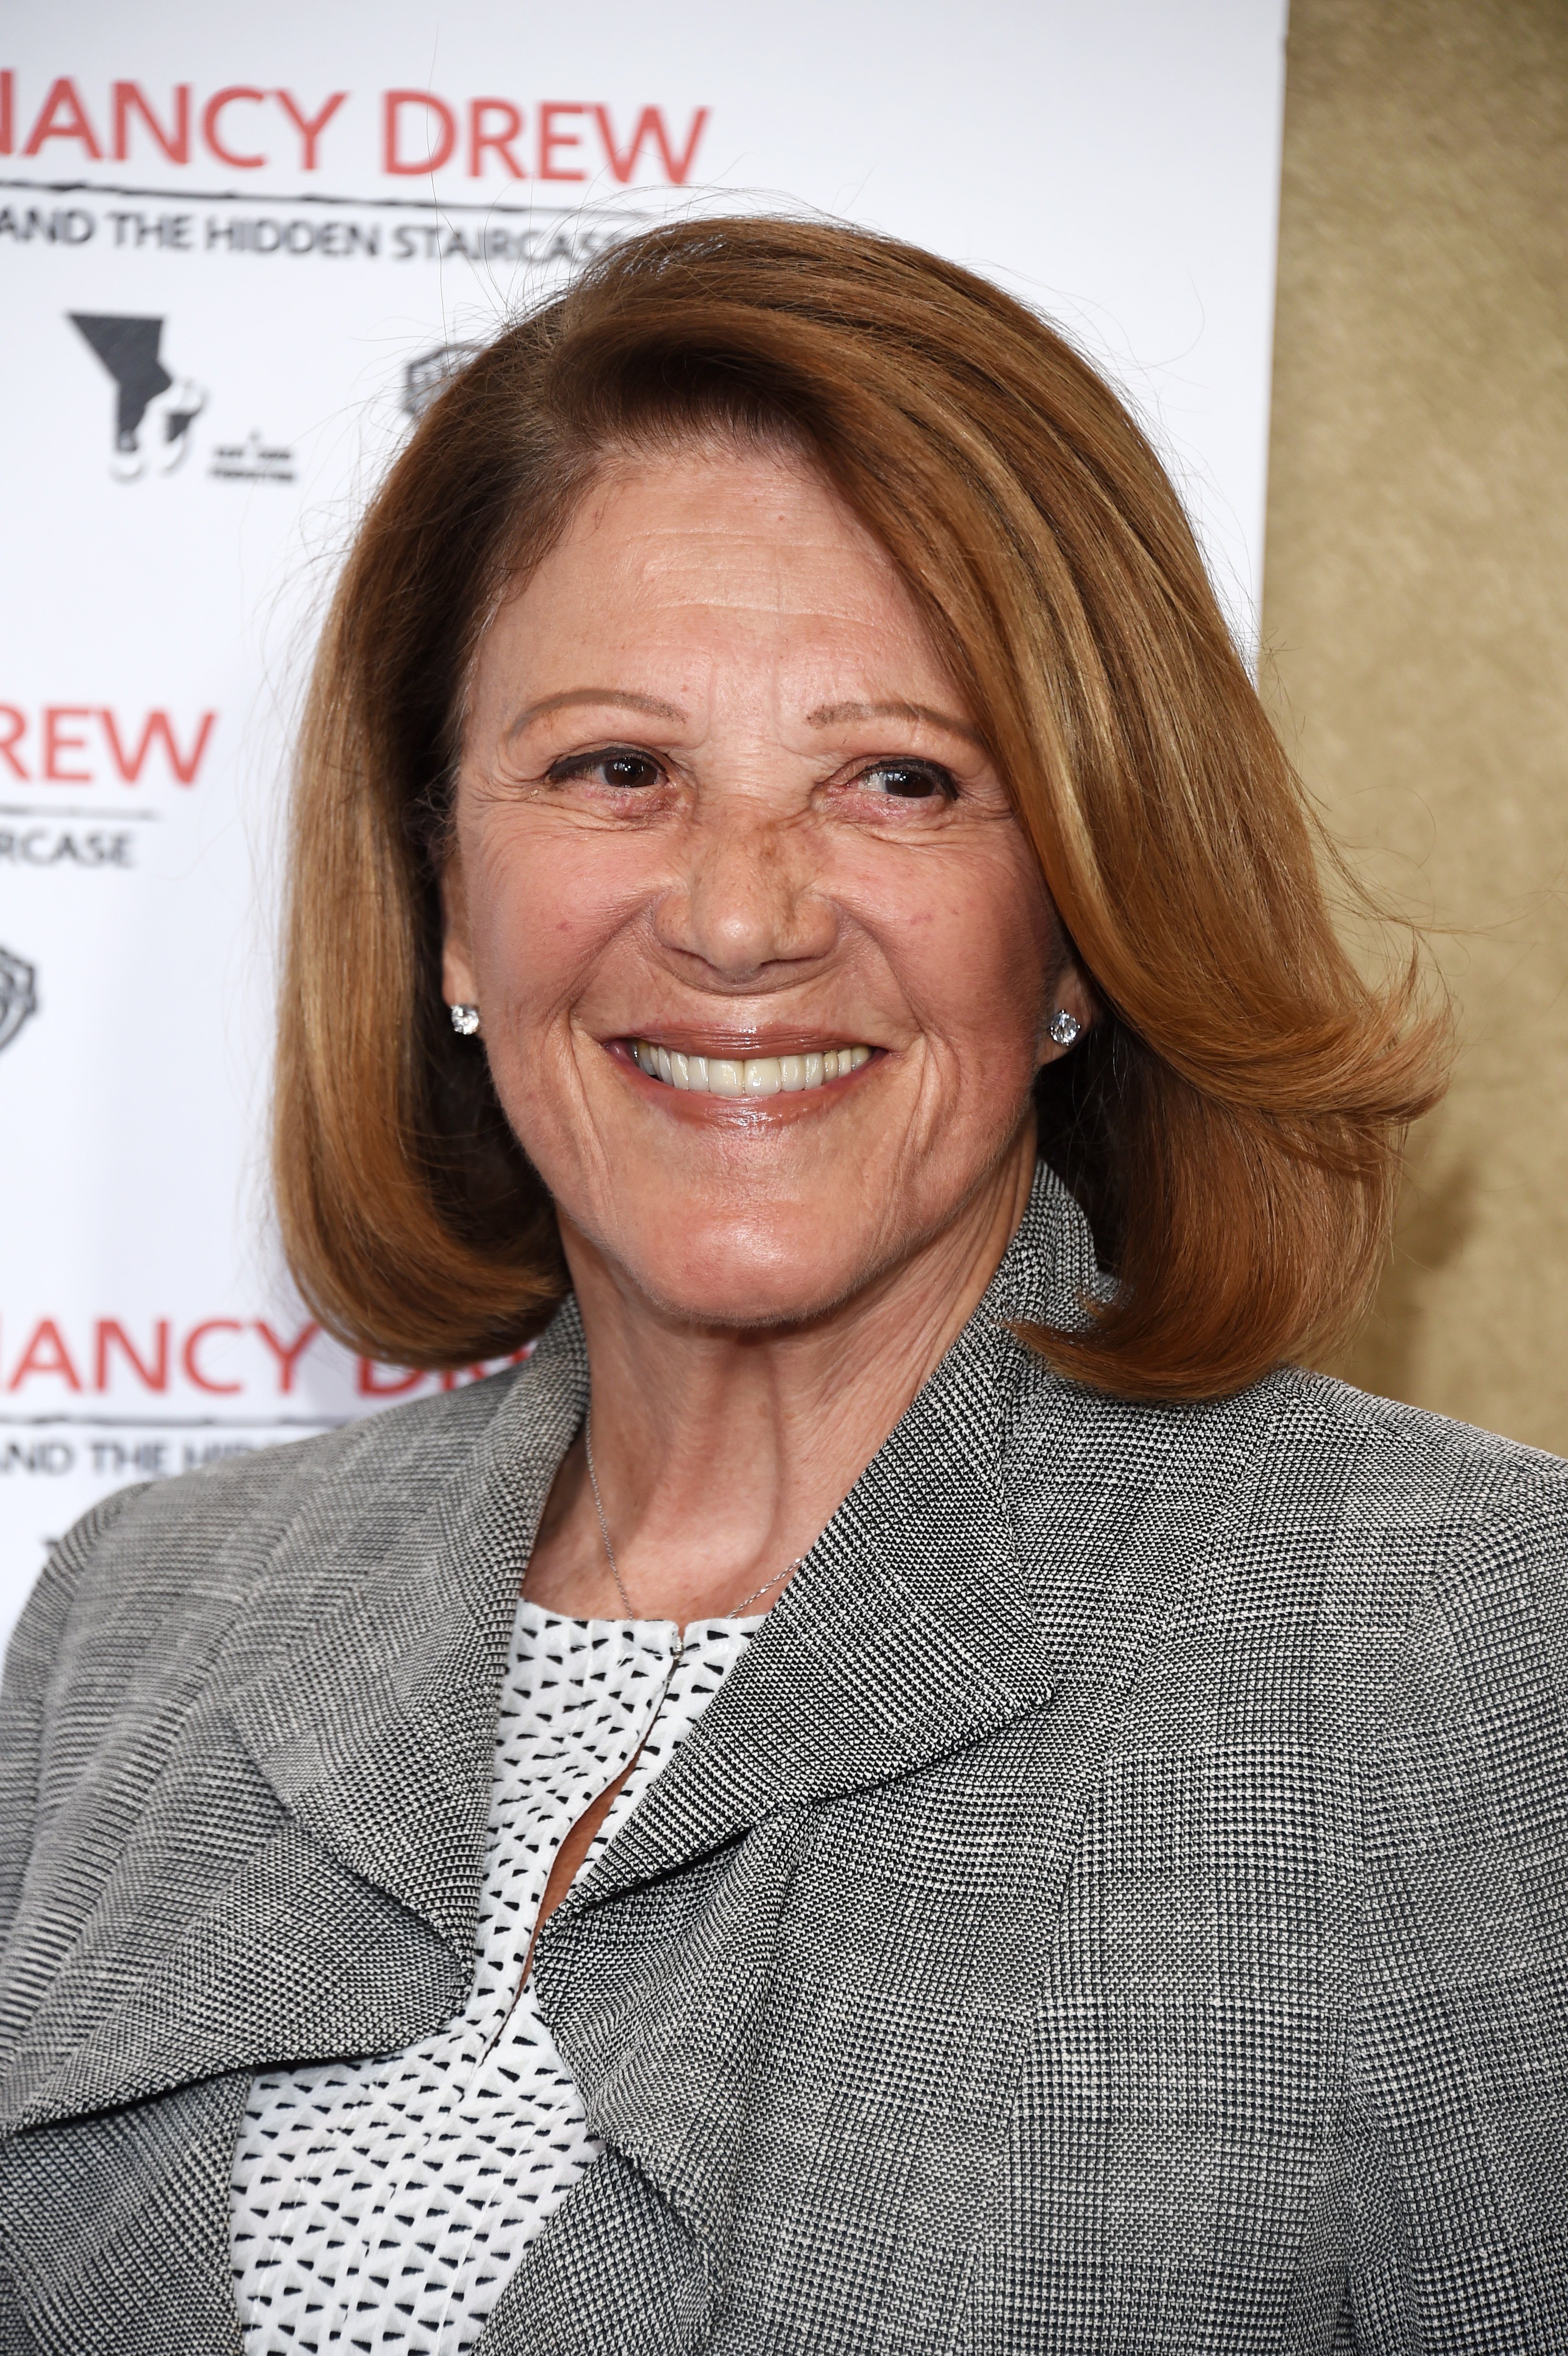 Linda Lavin arrives at the World Premiere of "Nancy Drew And The Hidden Staircase" at AMC Century City 15 on March 10, 2019, in Century City, California. | Source: Getty Images| Source: Getty Images